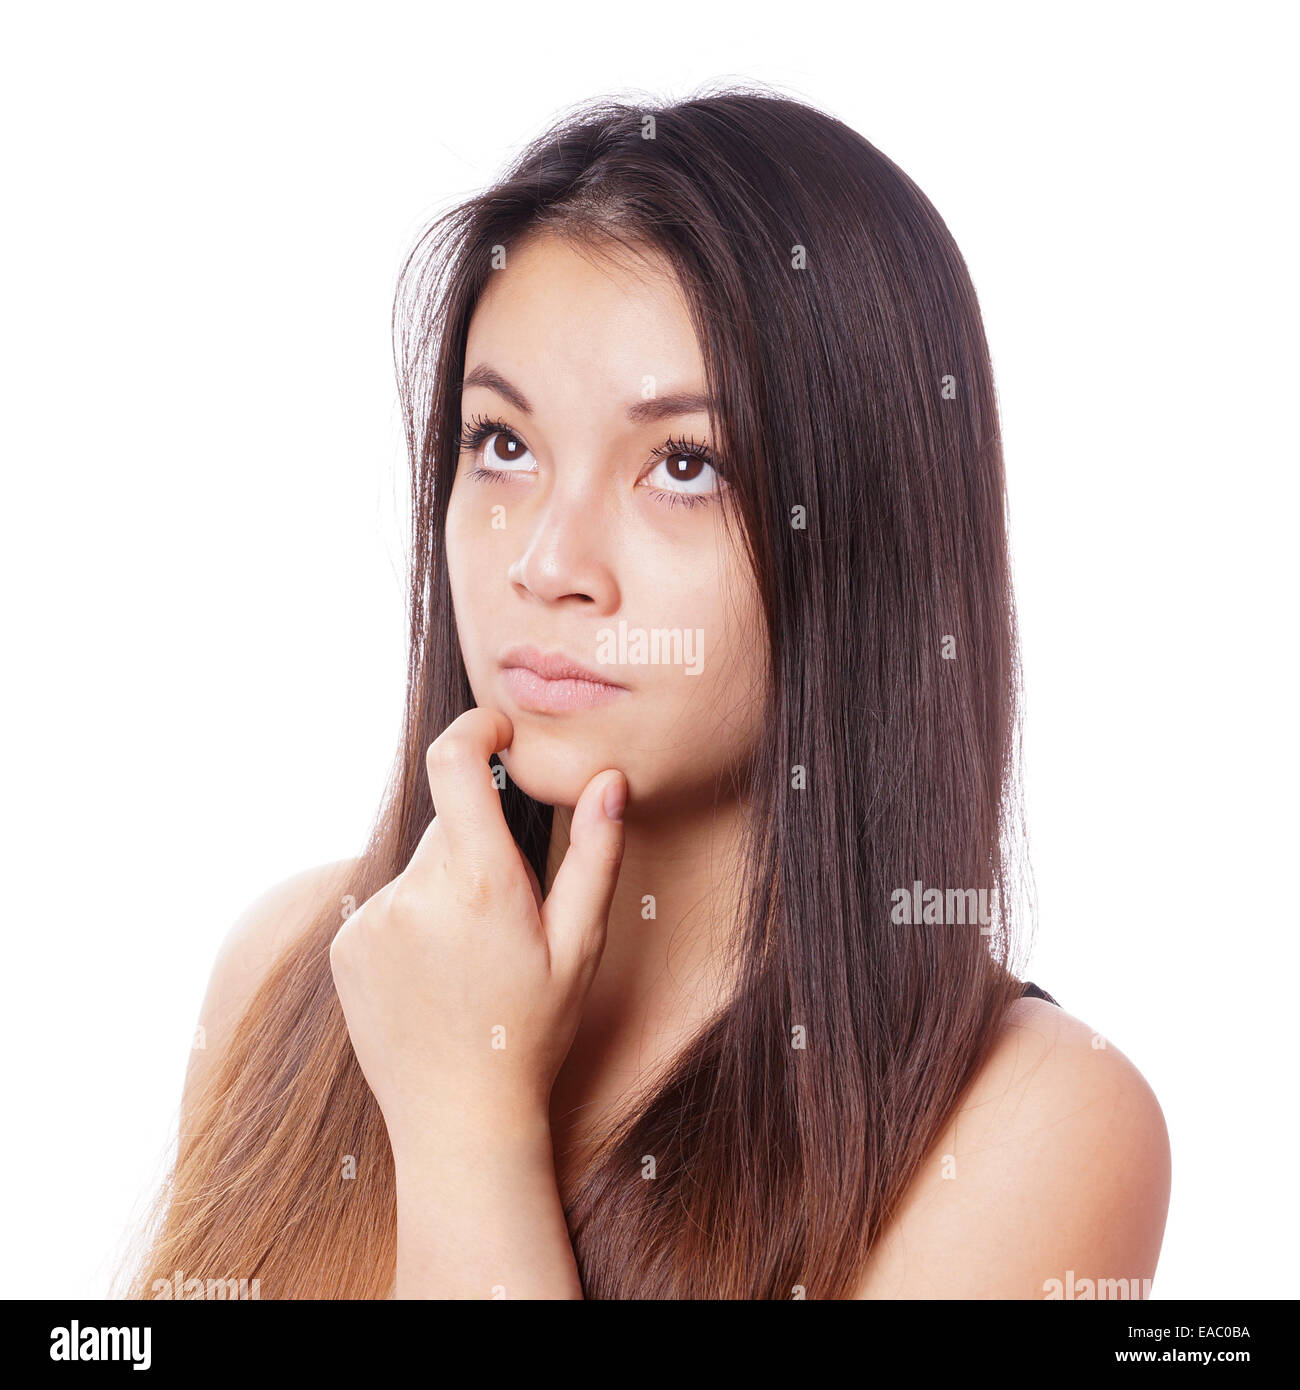 young asian woman thinking Stock Photo